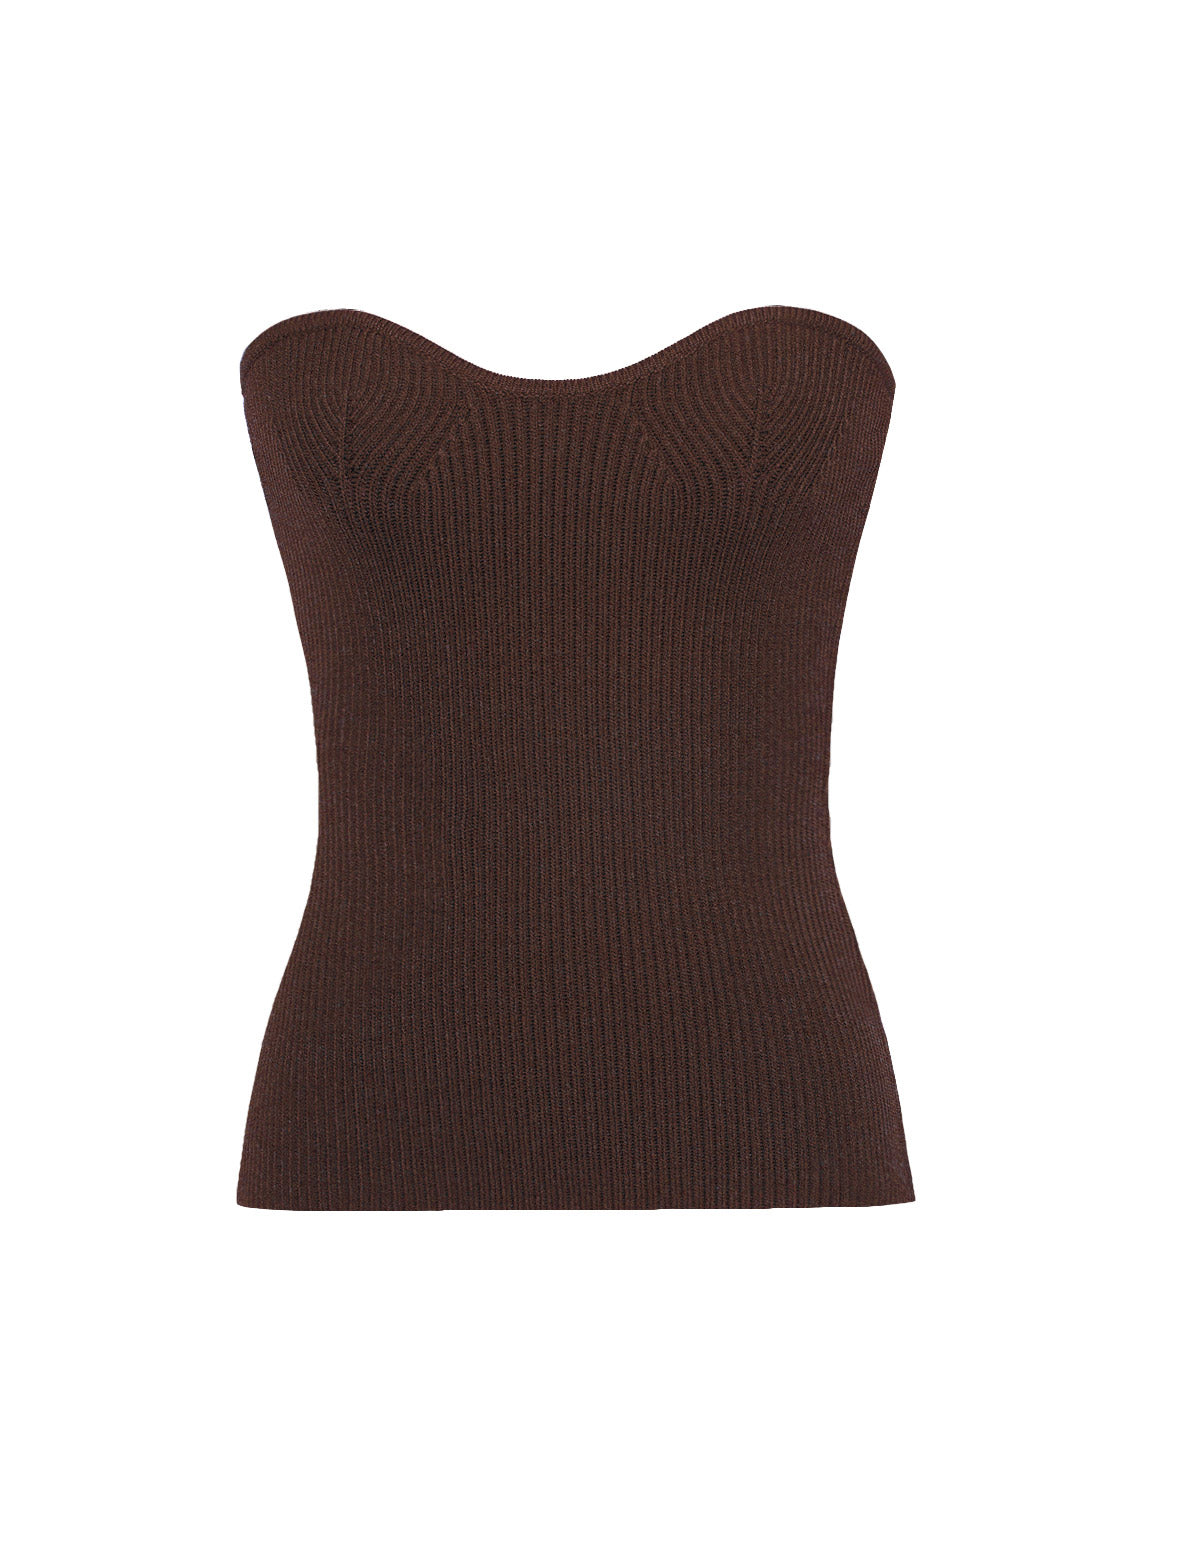 Cass Sweetheart Knit In Chocolate-BESTSELLER